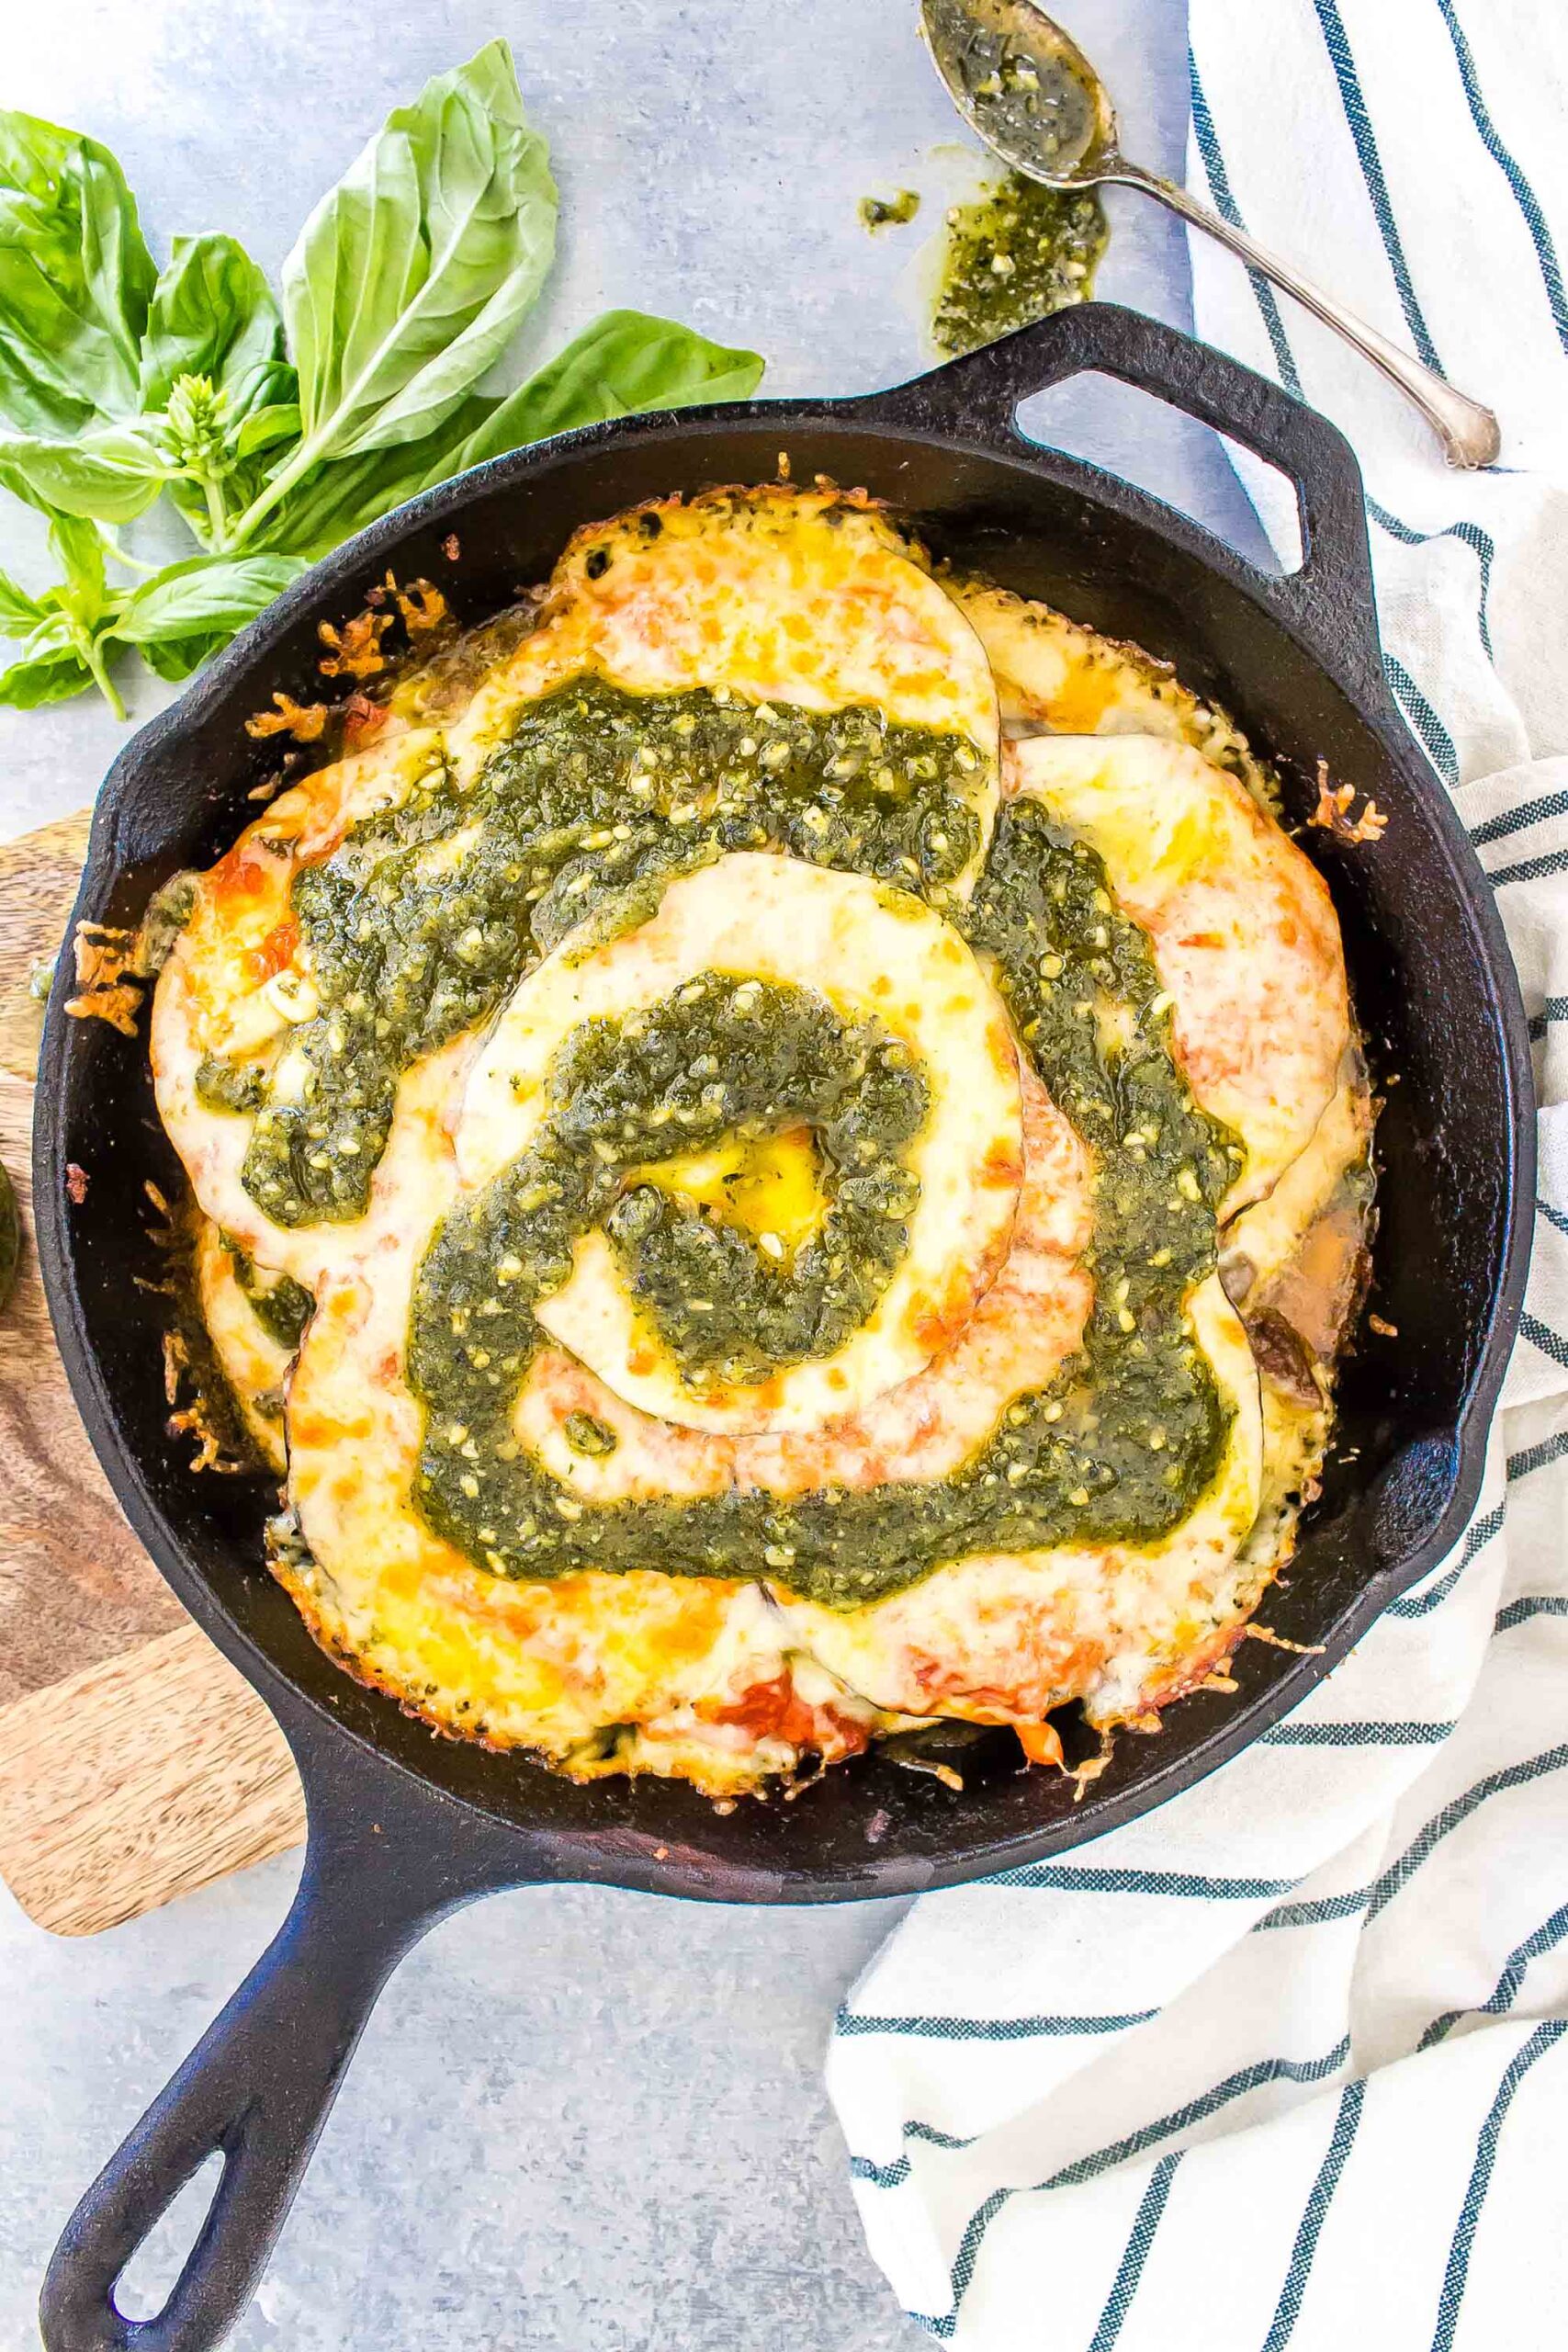 Keto Lasagna in a cast iron skillet with a pesto swirl on top, there is a striped tea towel to the left and basil leaves in the top left corner